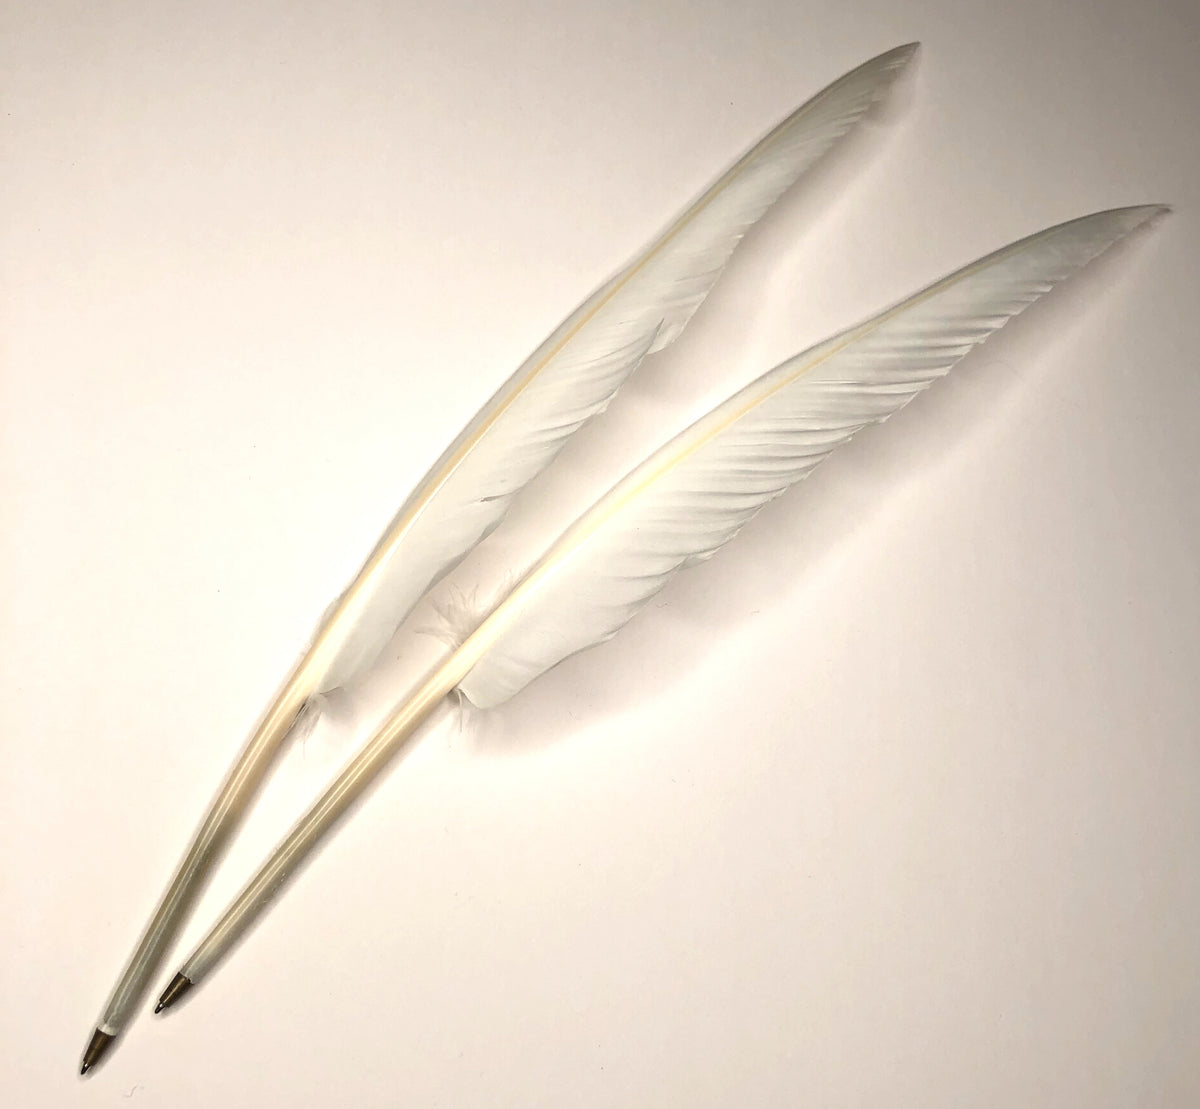 Cooperman Historical Products: Ballpoint Goose Quill Pen